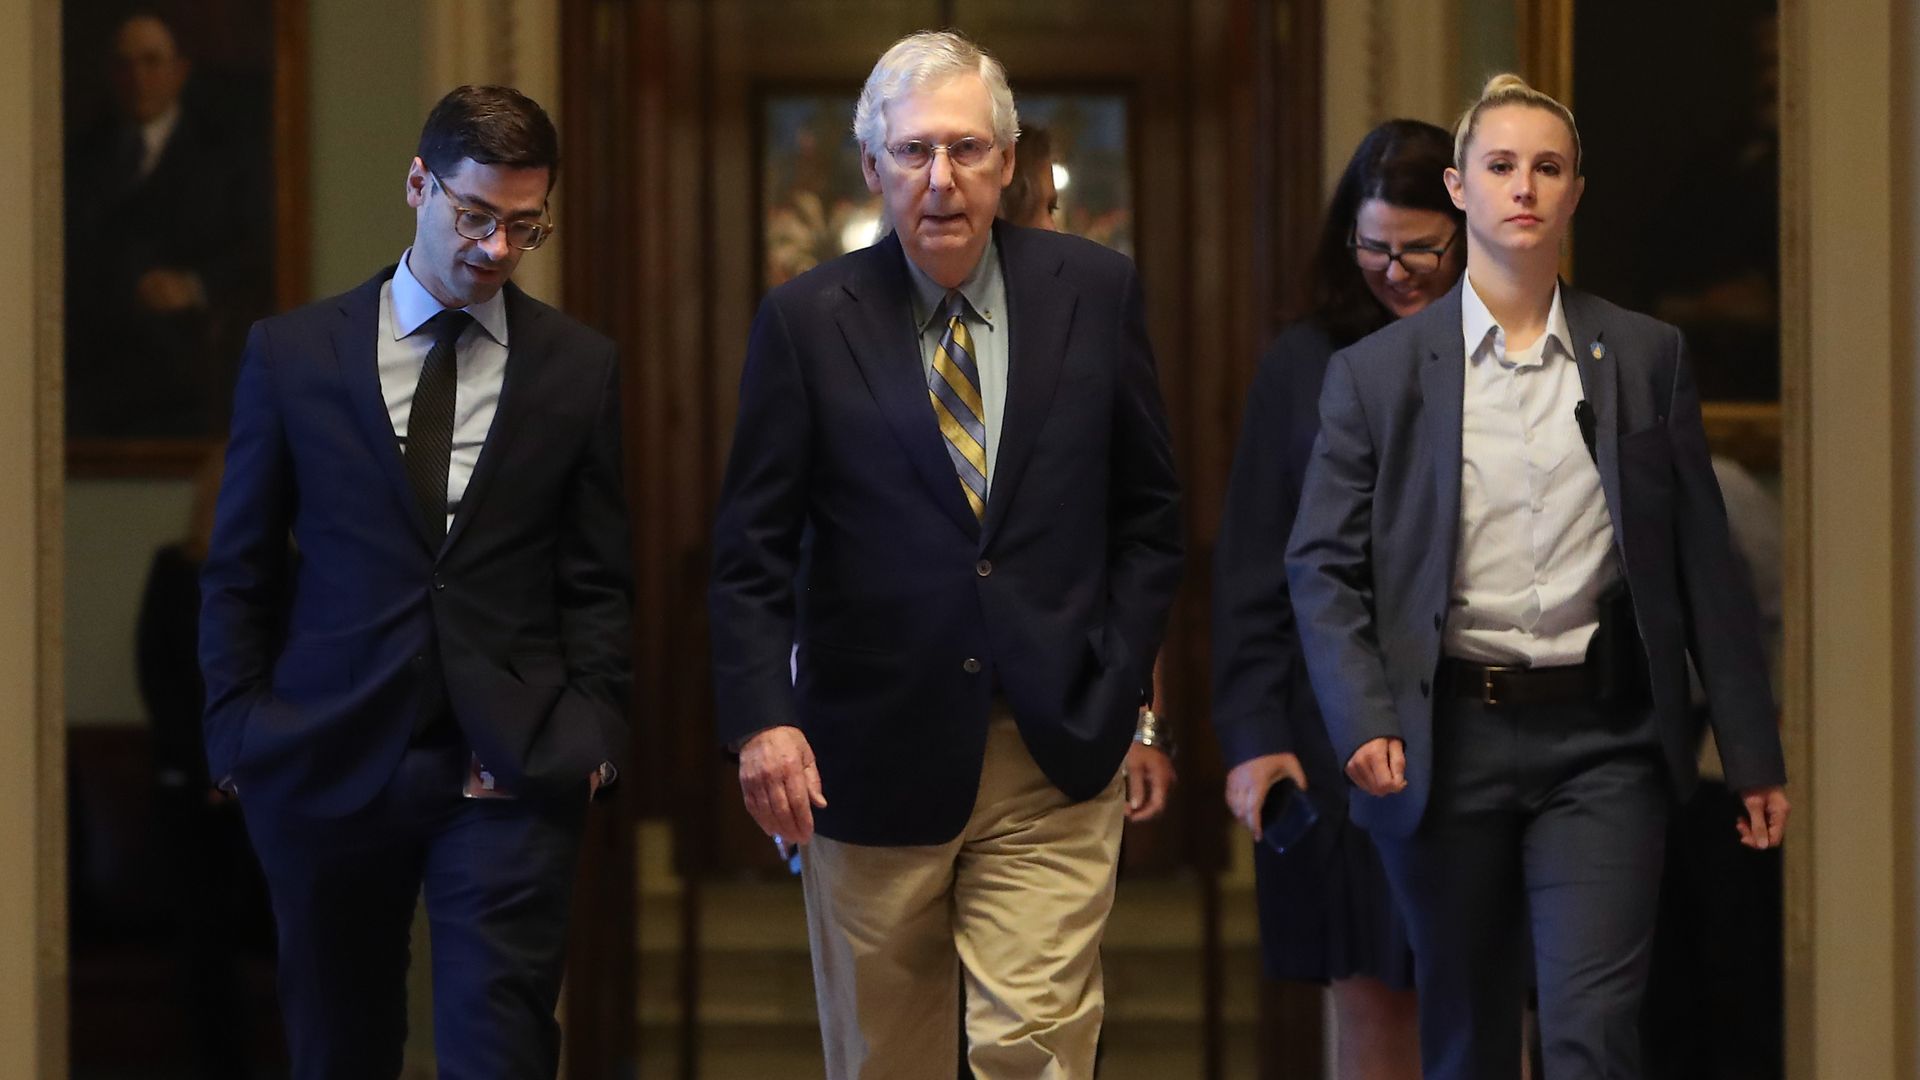 Senate Majority Leader Mitch McConnell of Kentucky walks through the Senate with two aides.